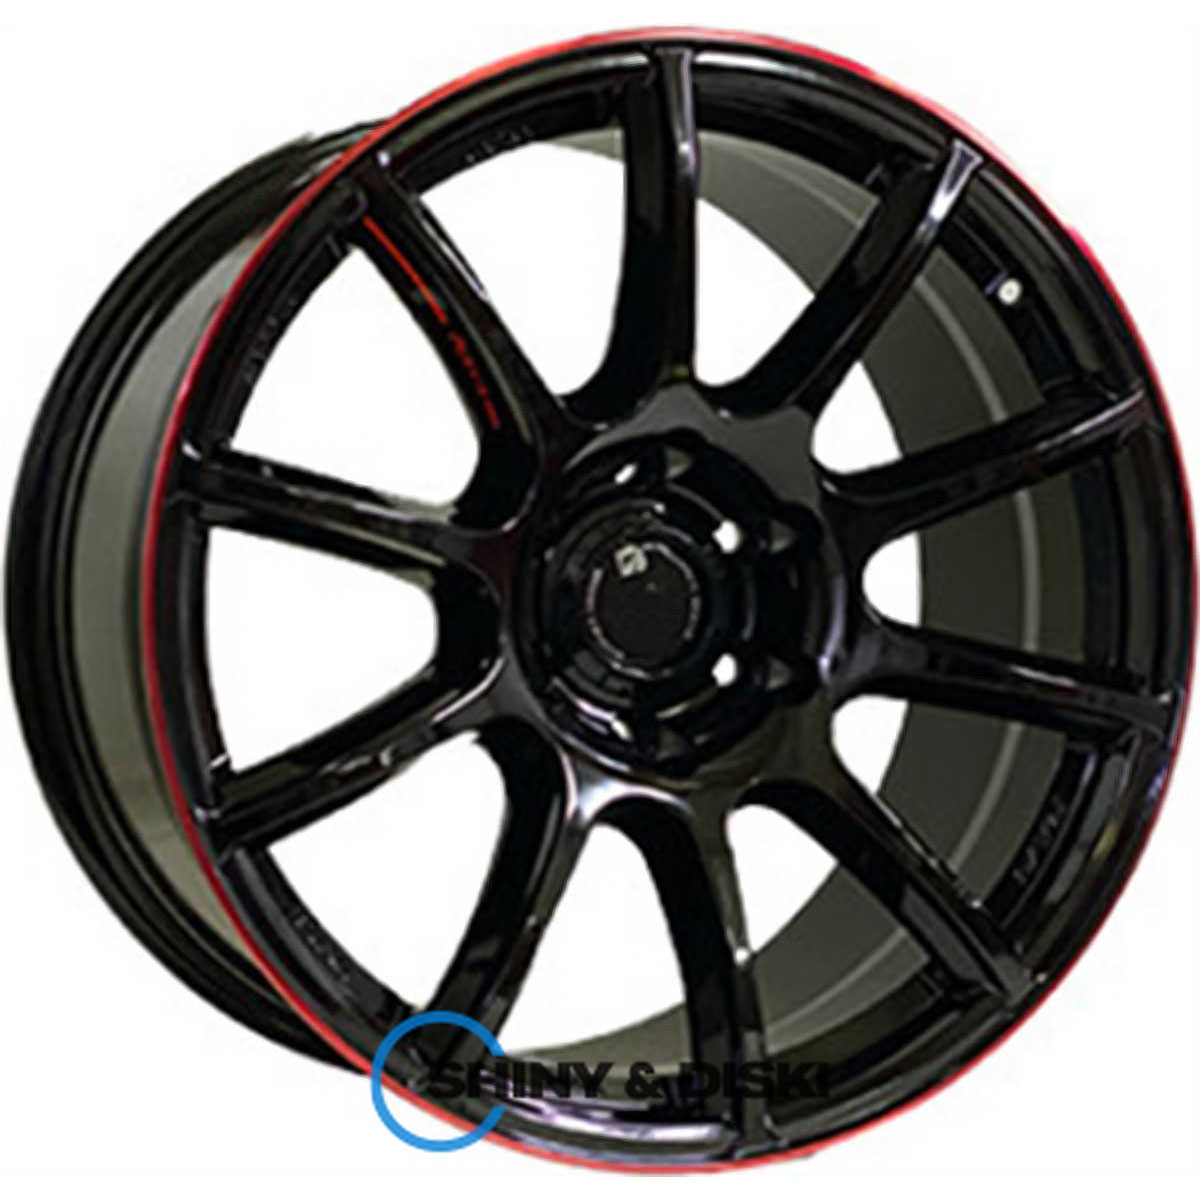 off road wheels ow1012 glossy black red line riva red r20 w8.5 pcd6x139.7 et10 dia110.5